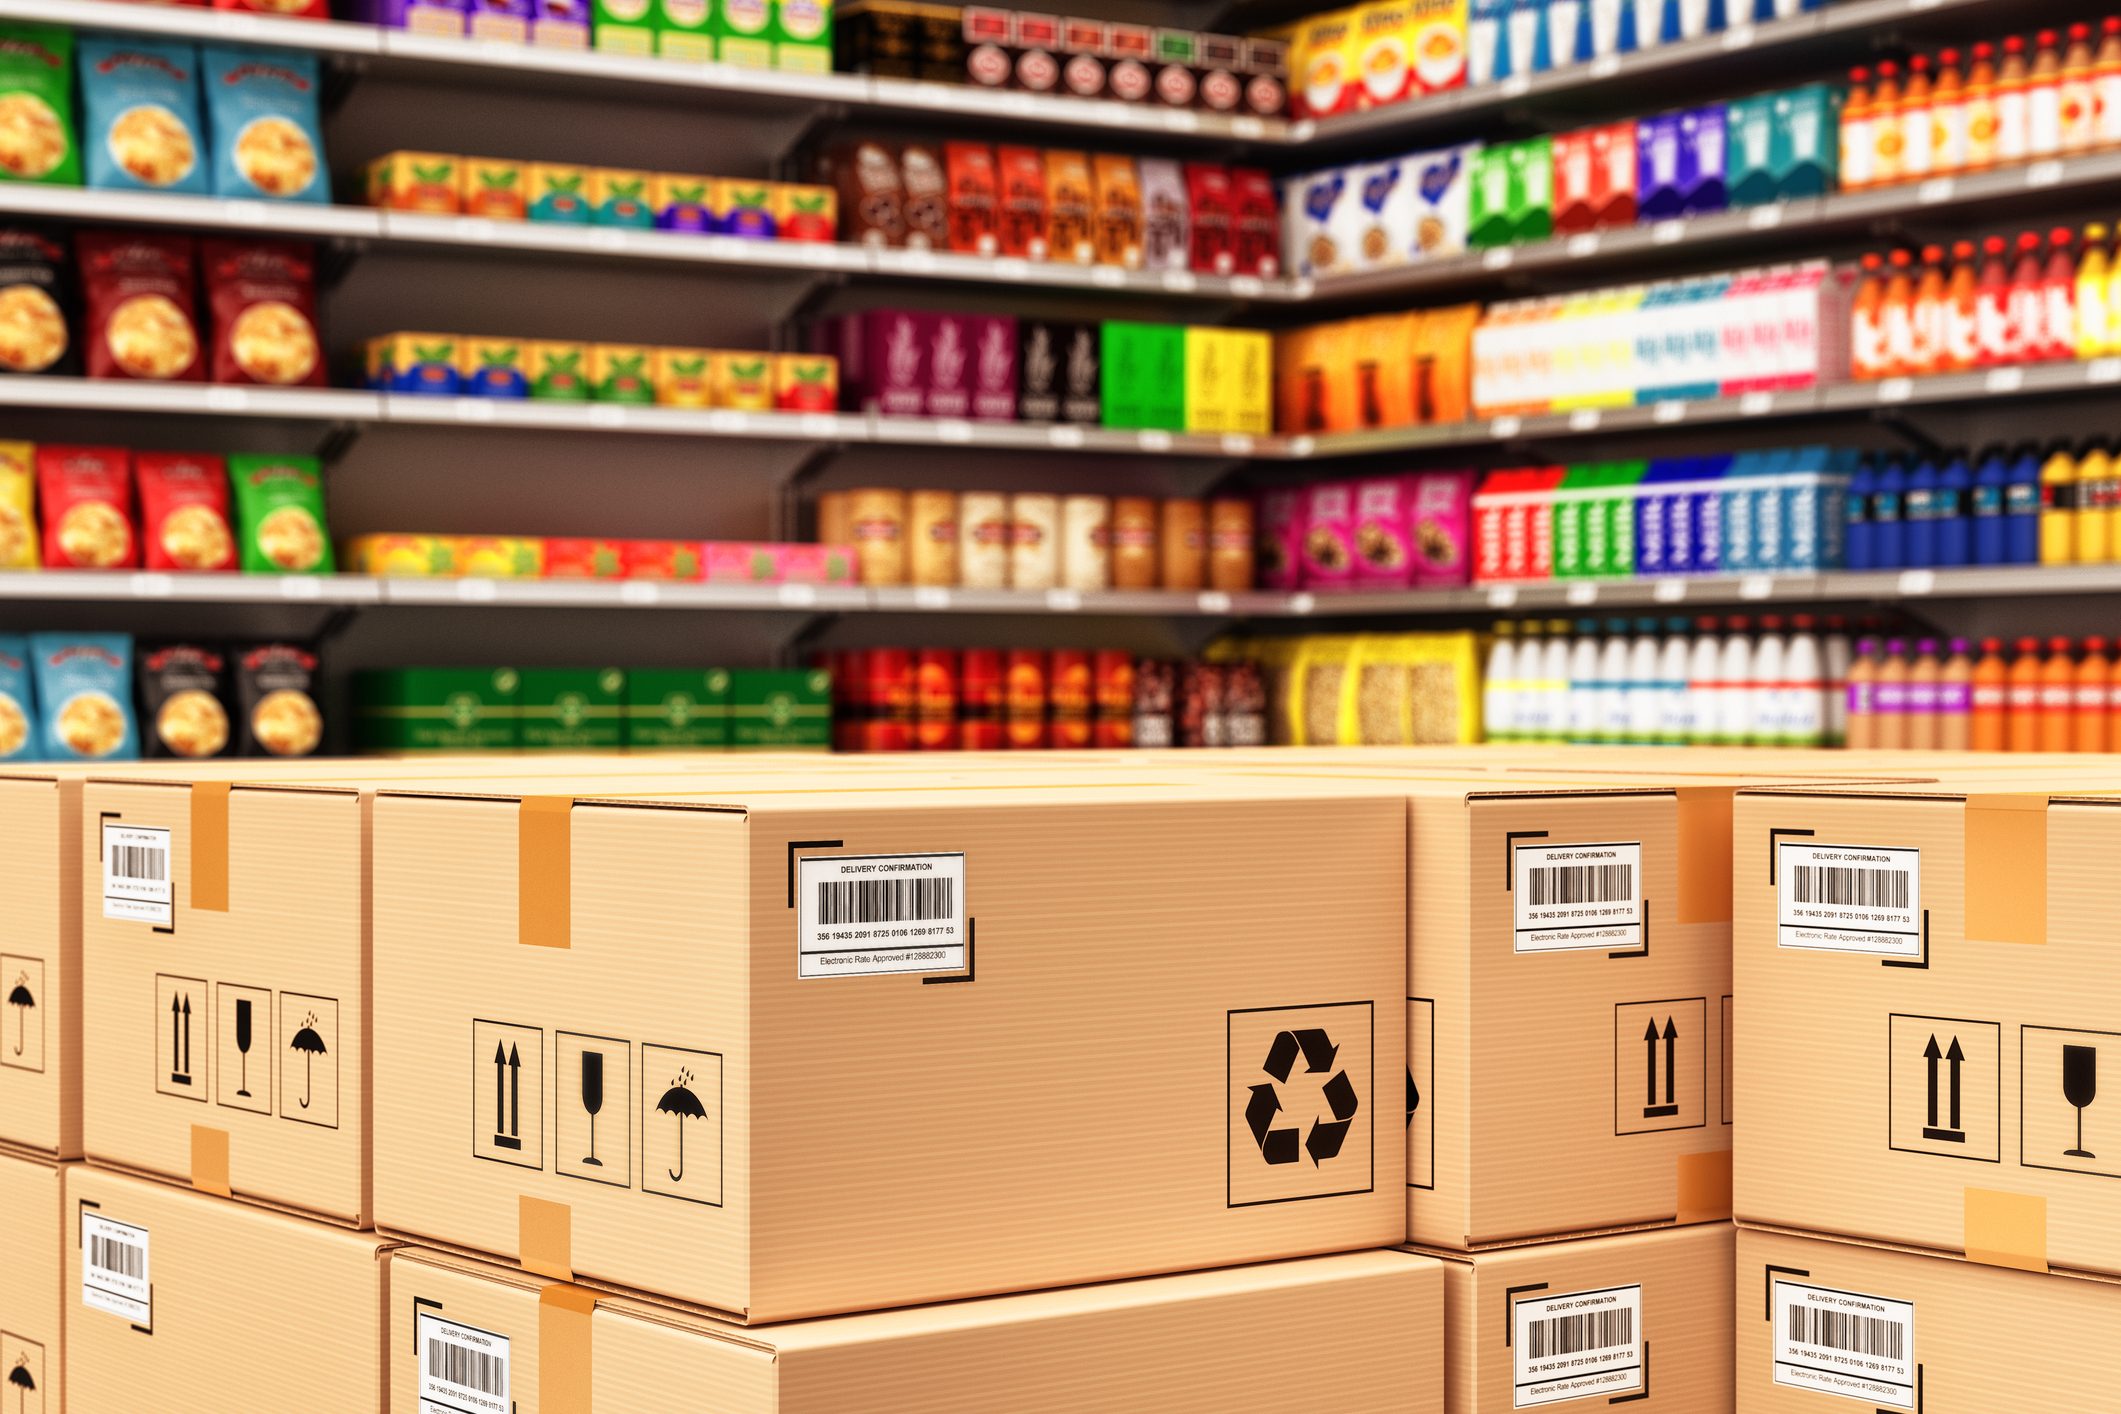 Shoppers in the UK and Germany prefer cartonboard primary packaging, Elopak survey finds – Fastmarkets